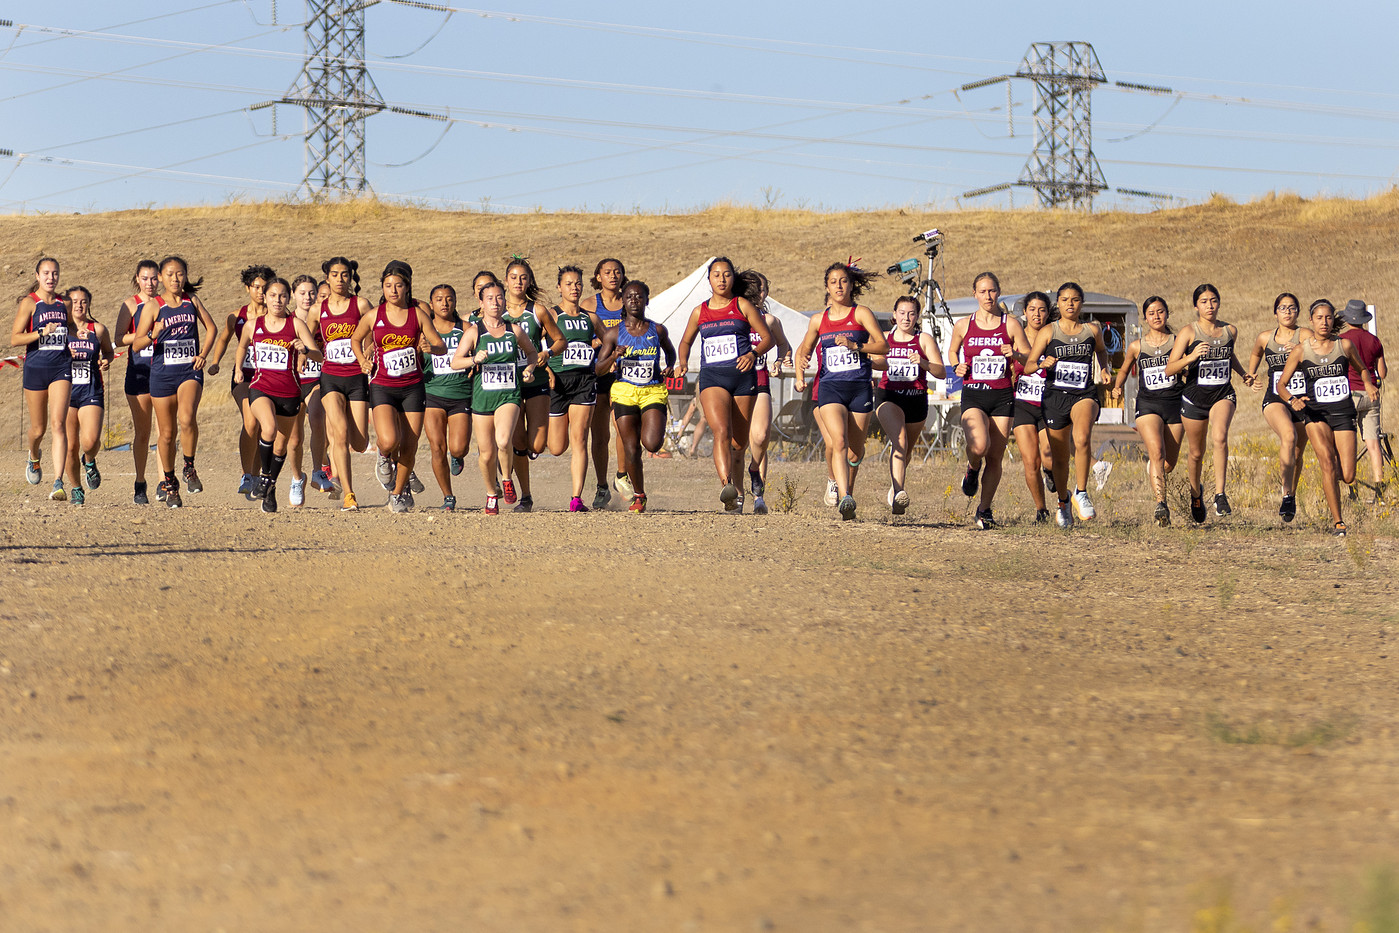 Villa (11th) and Morales (12th) are the top runners for the Women's Cross Country team at the Big 8 Preview Meet